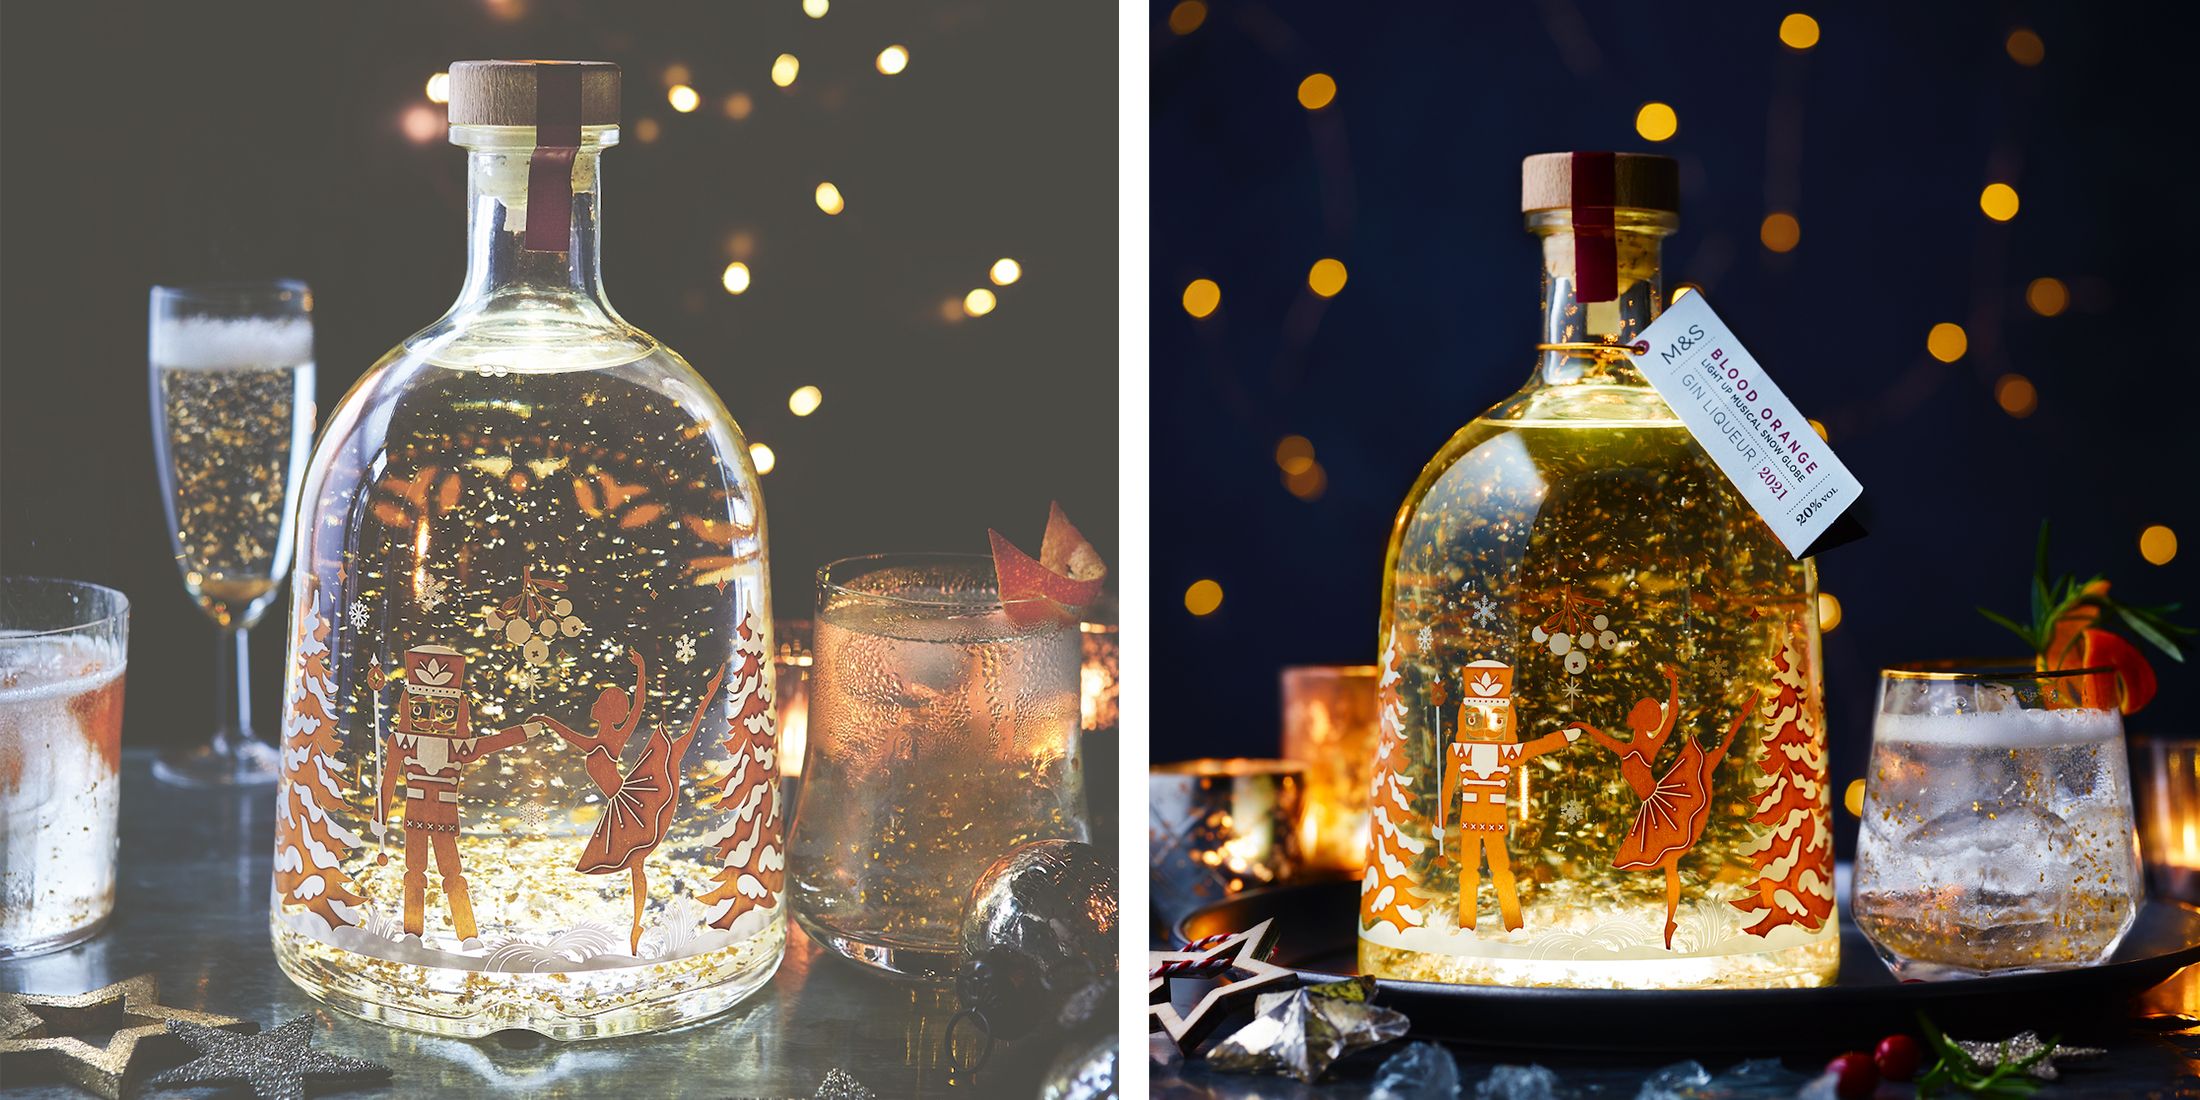 M&S is selling 1.5L of Light Up Gin Globe Liqueur magnums sellout Snow